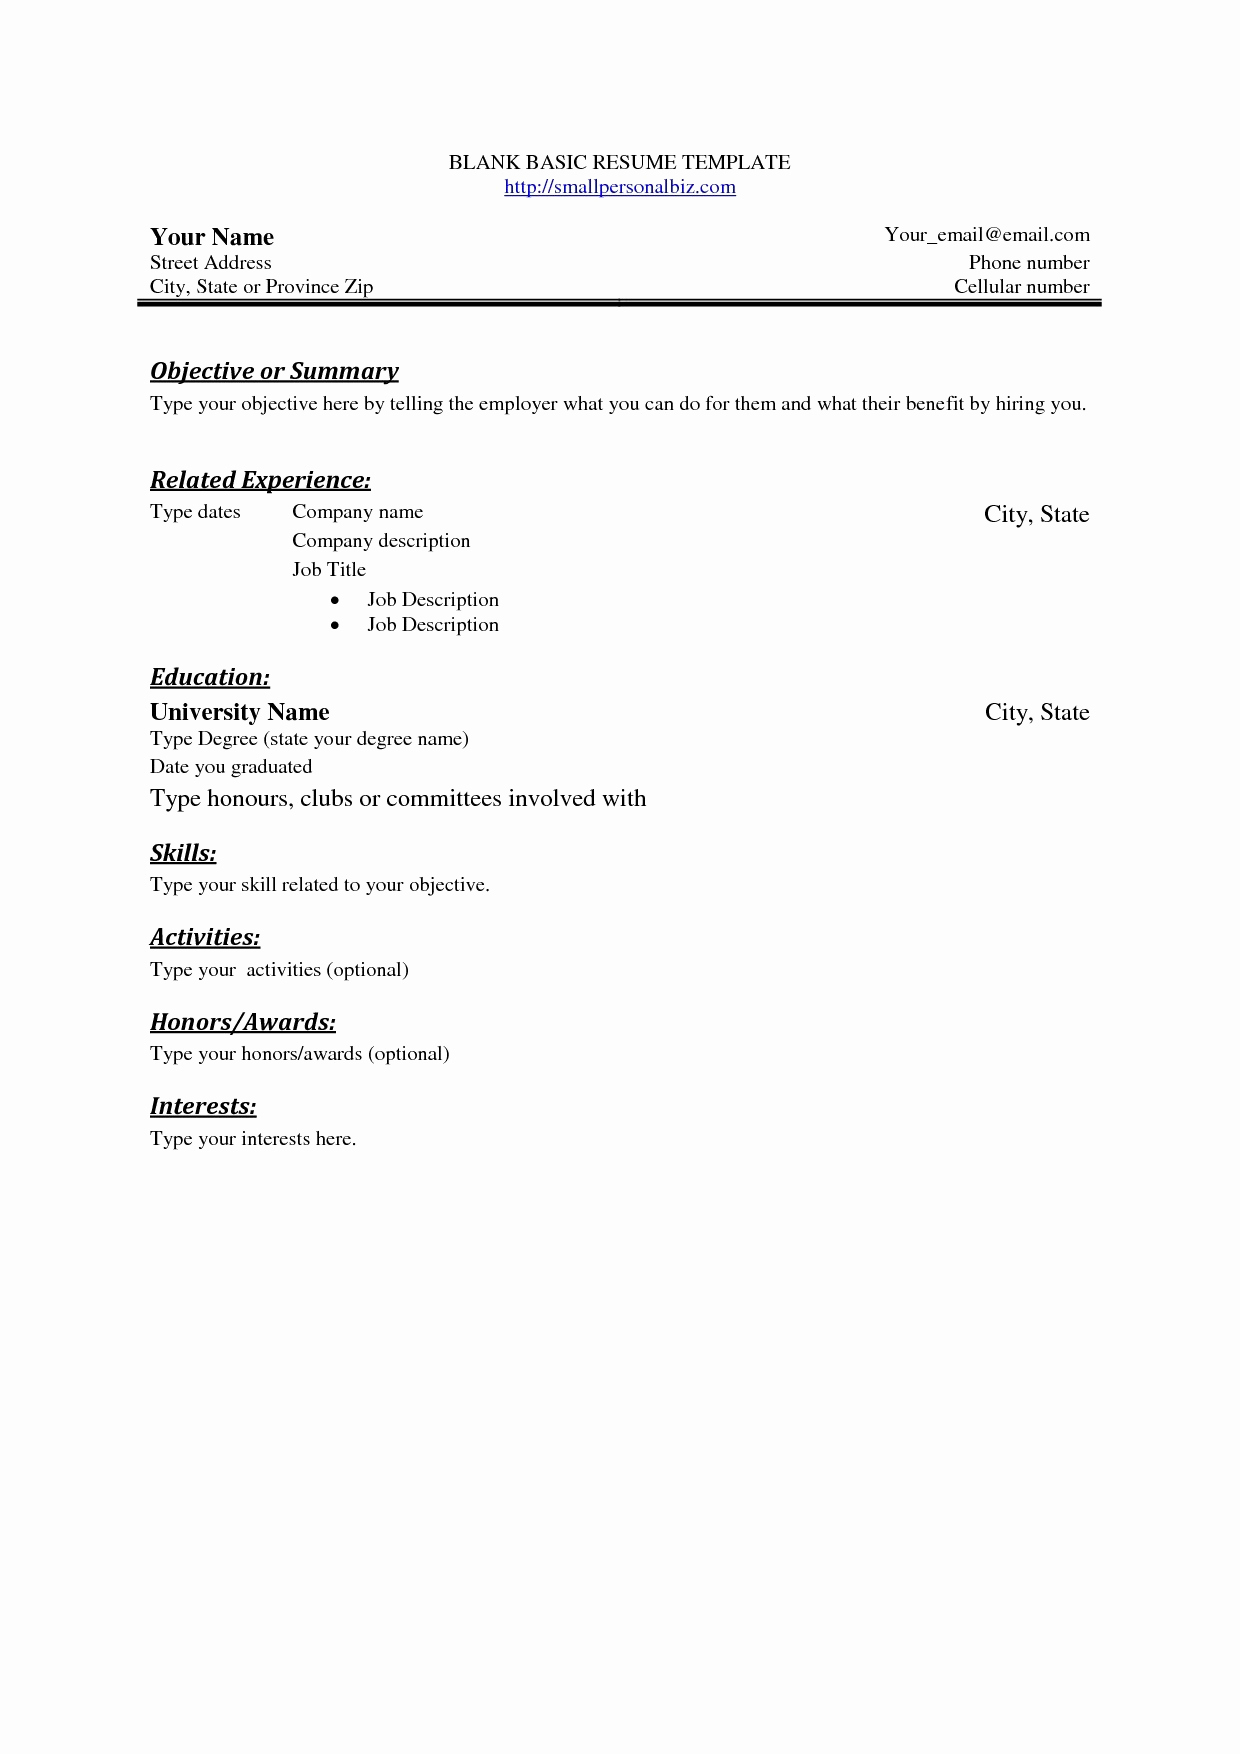 Easy Resume Template Free Cover Letter Templates In Free Basic Resume Templates Microsoft Word